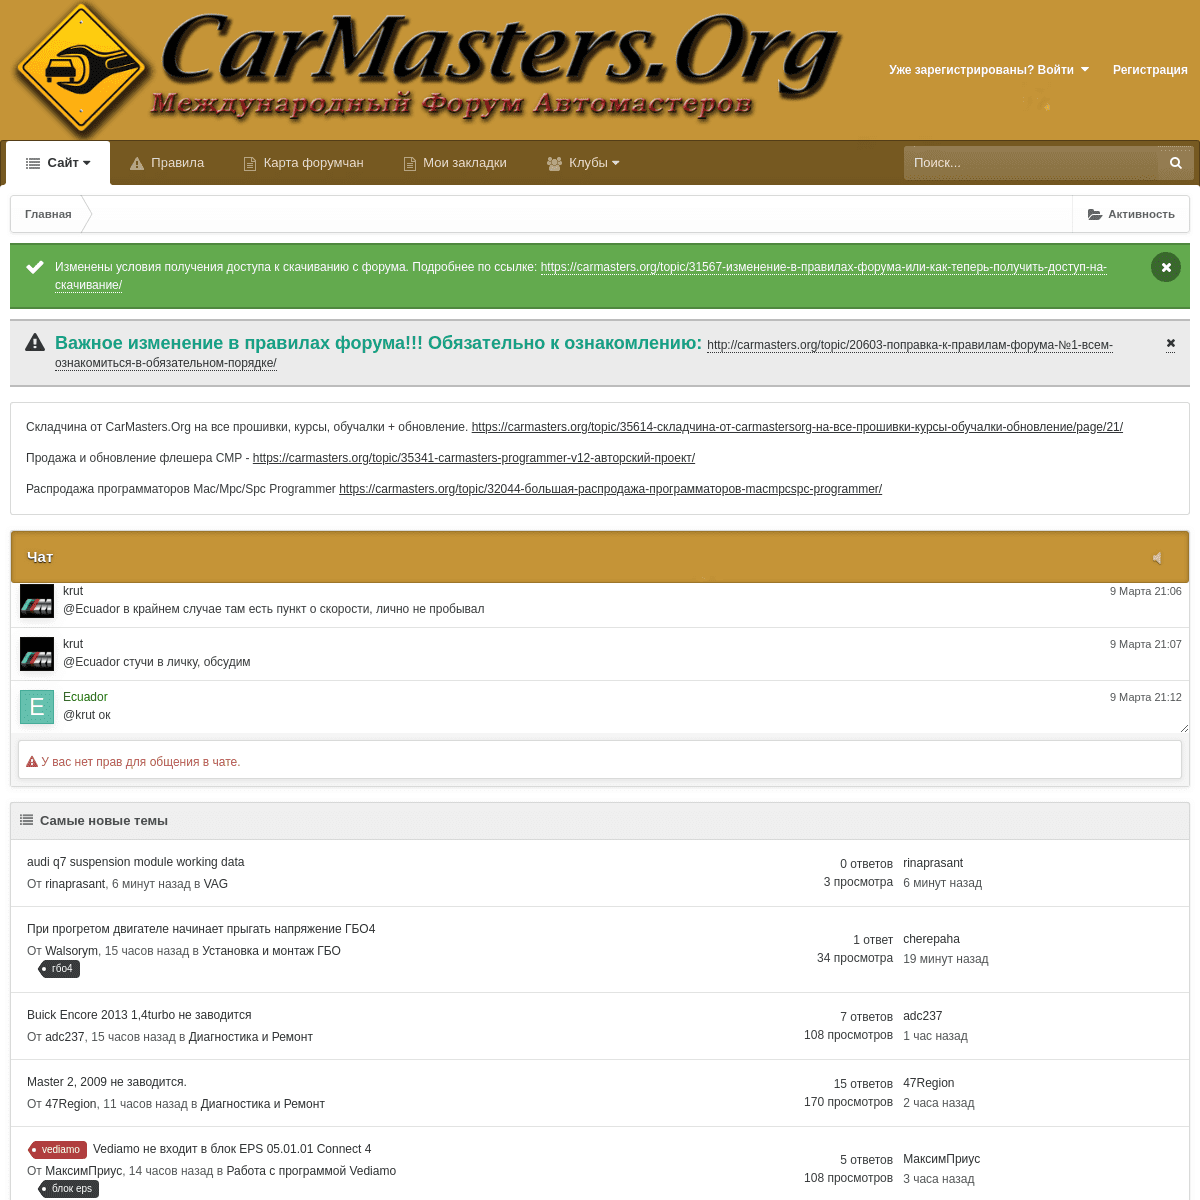 A complete backup of carmasters.org